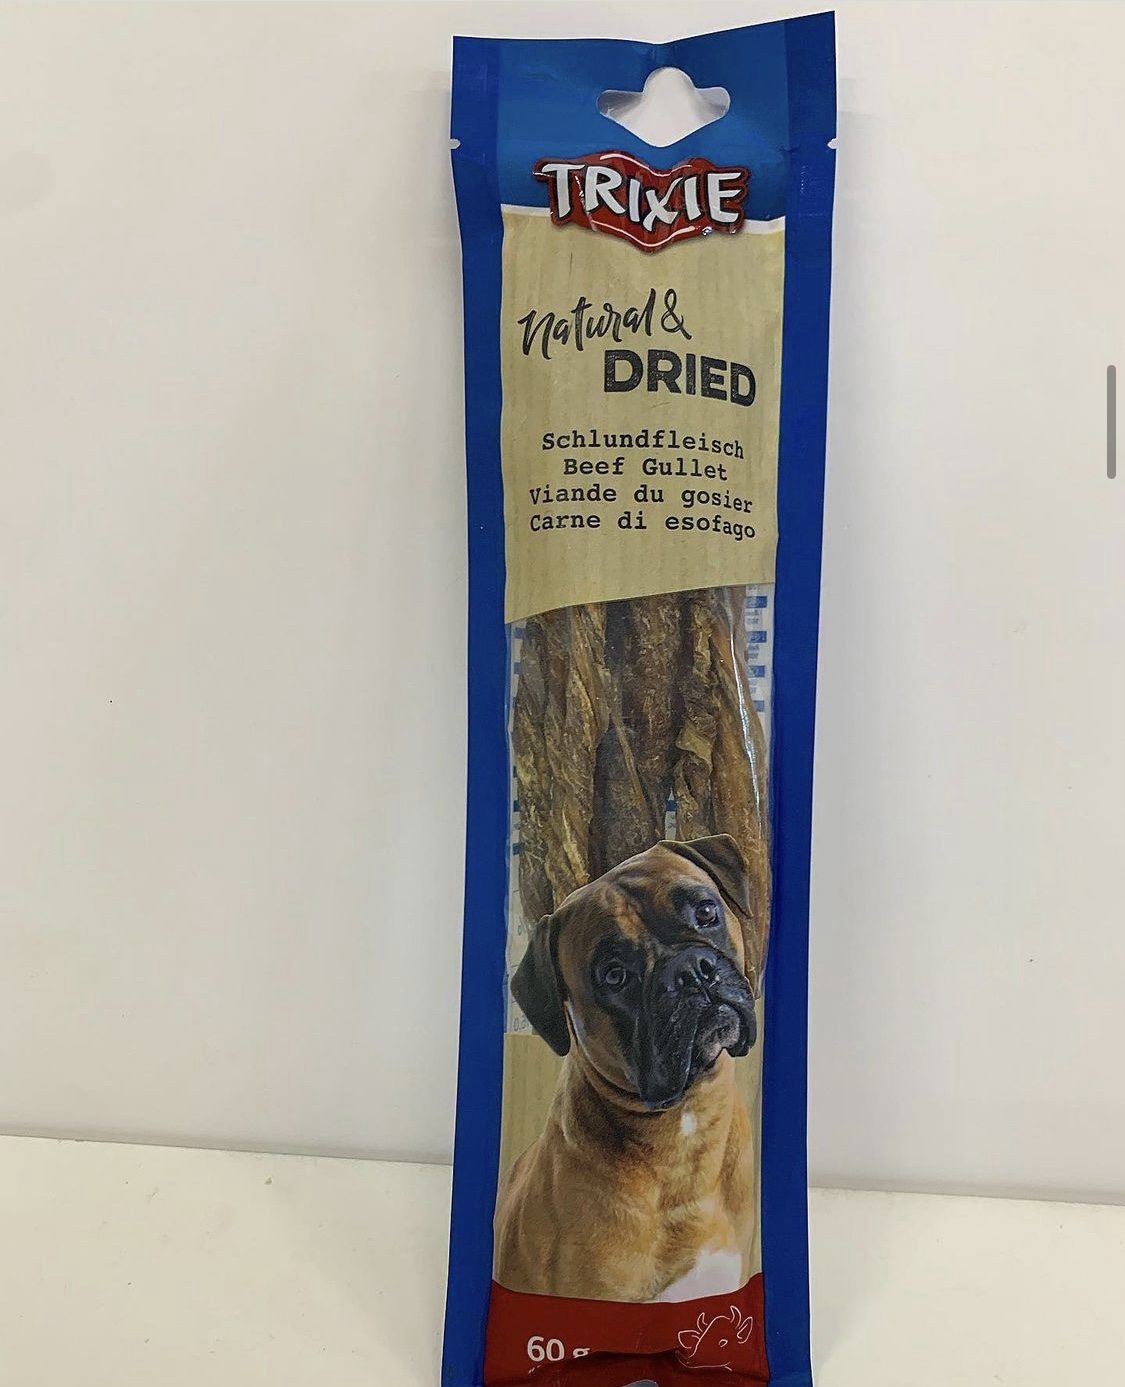 Trixie natural dried